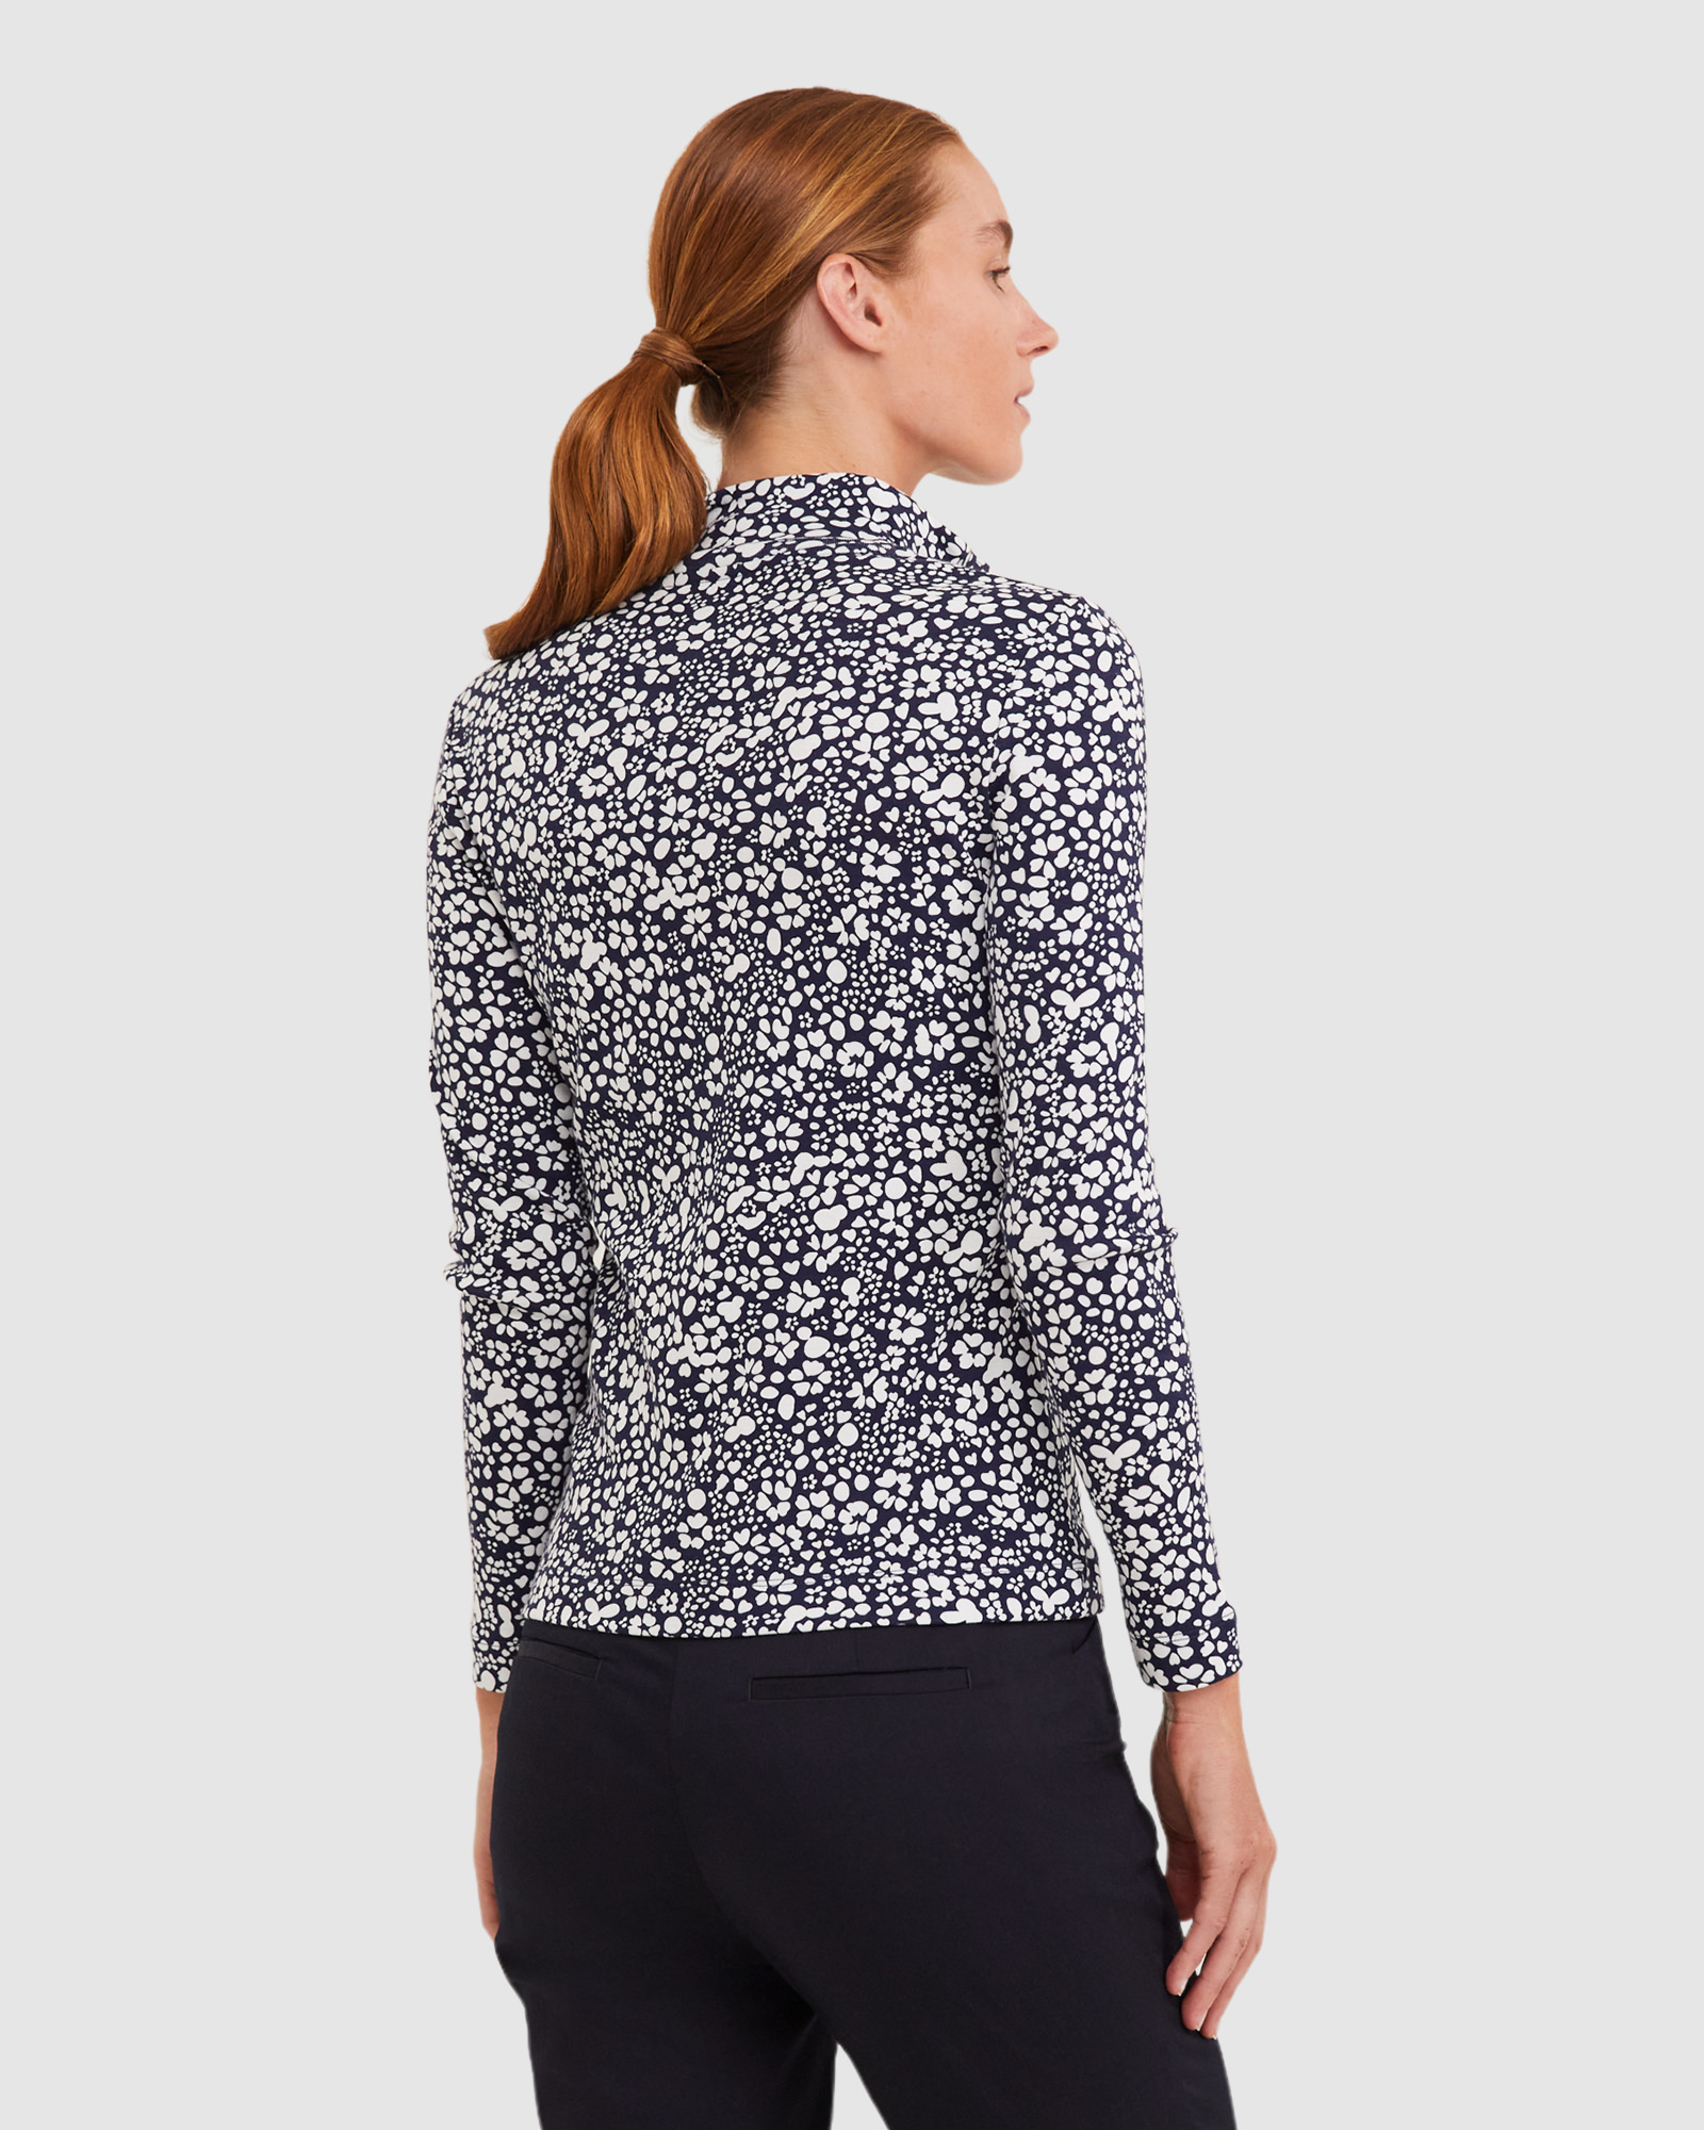 Lucy Bloom Funnel Neck Top in NAVY/IVORY